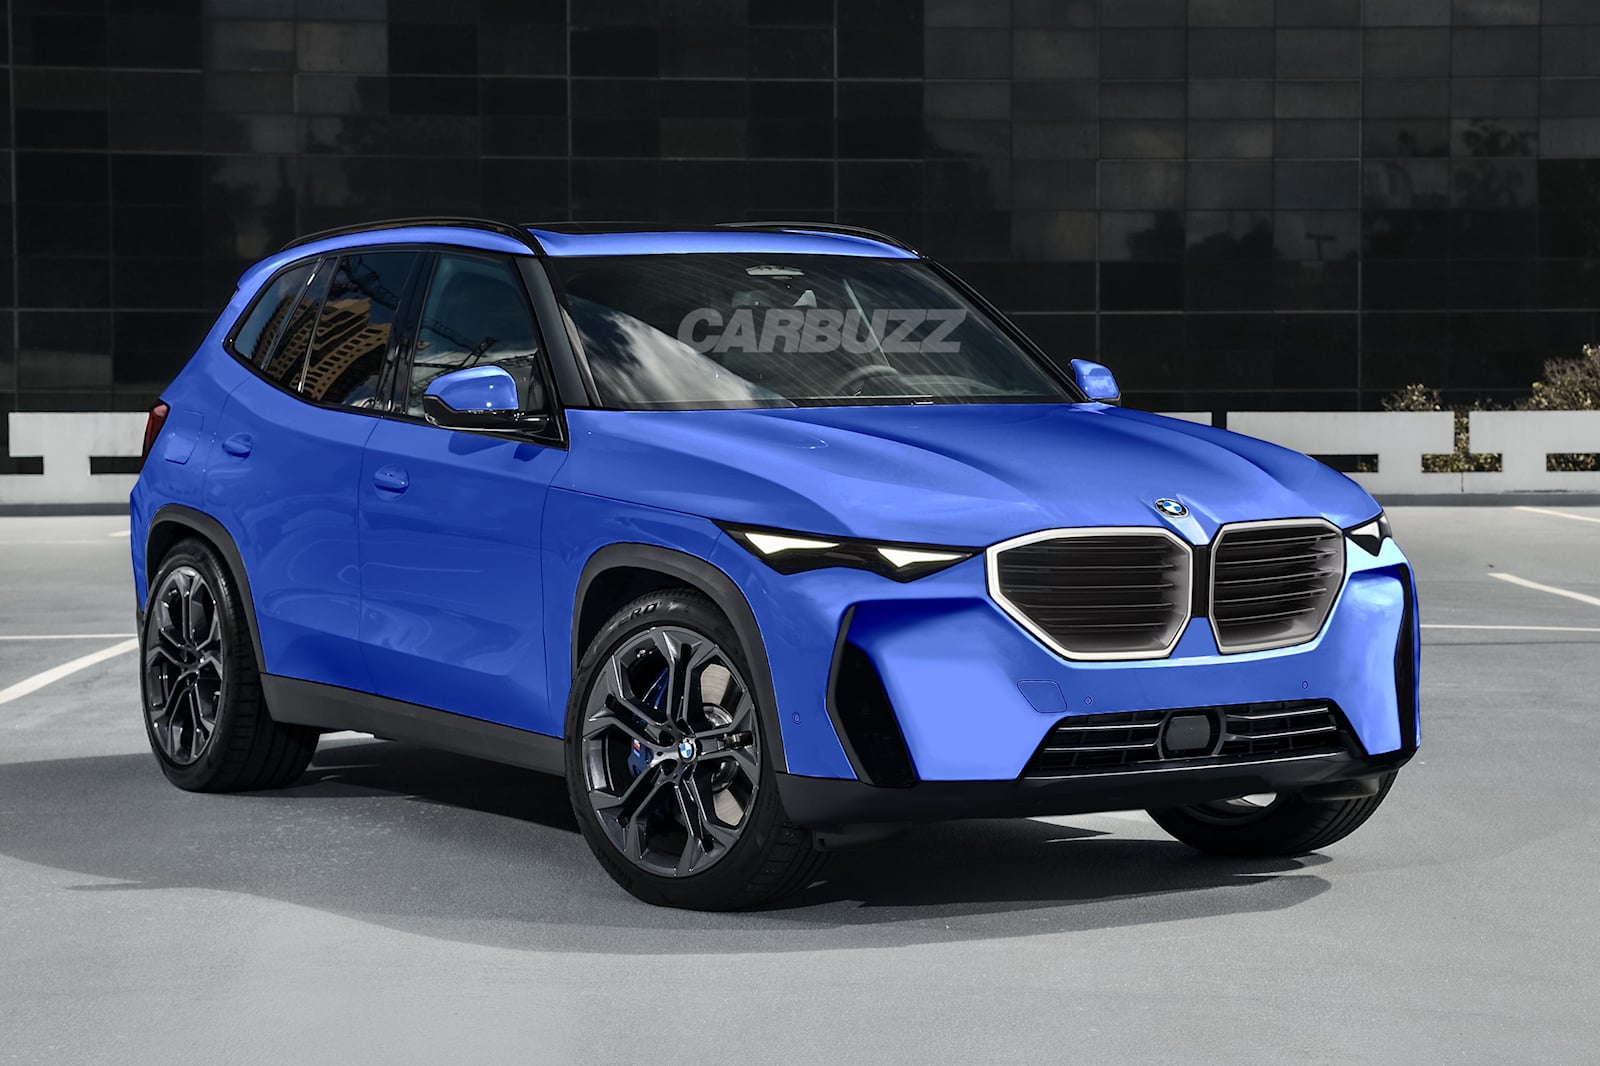 Next-Gen BMW X5 Looks Epic With XM-Inspired Styling